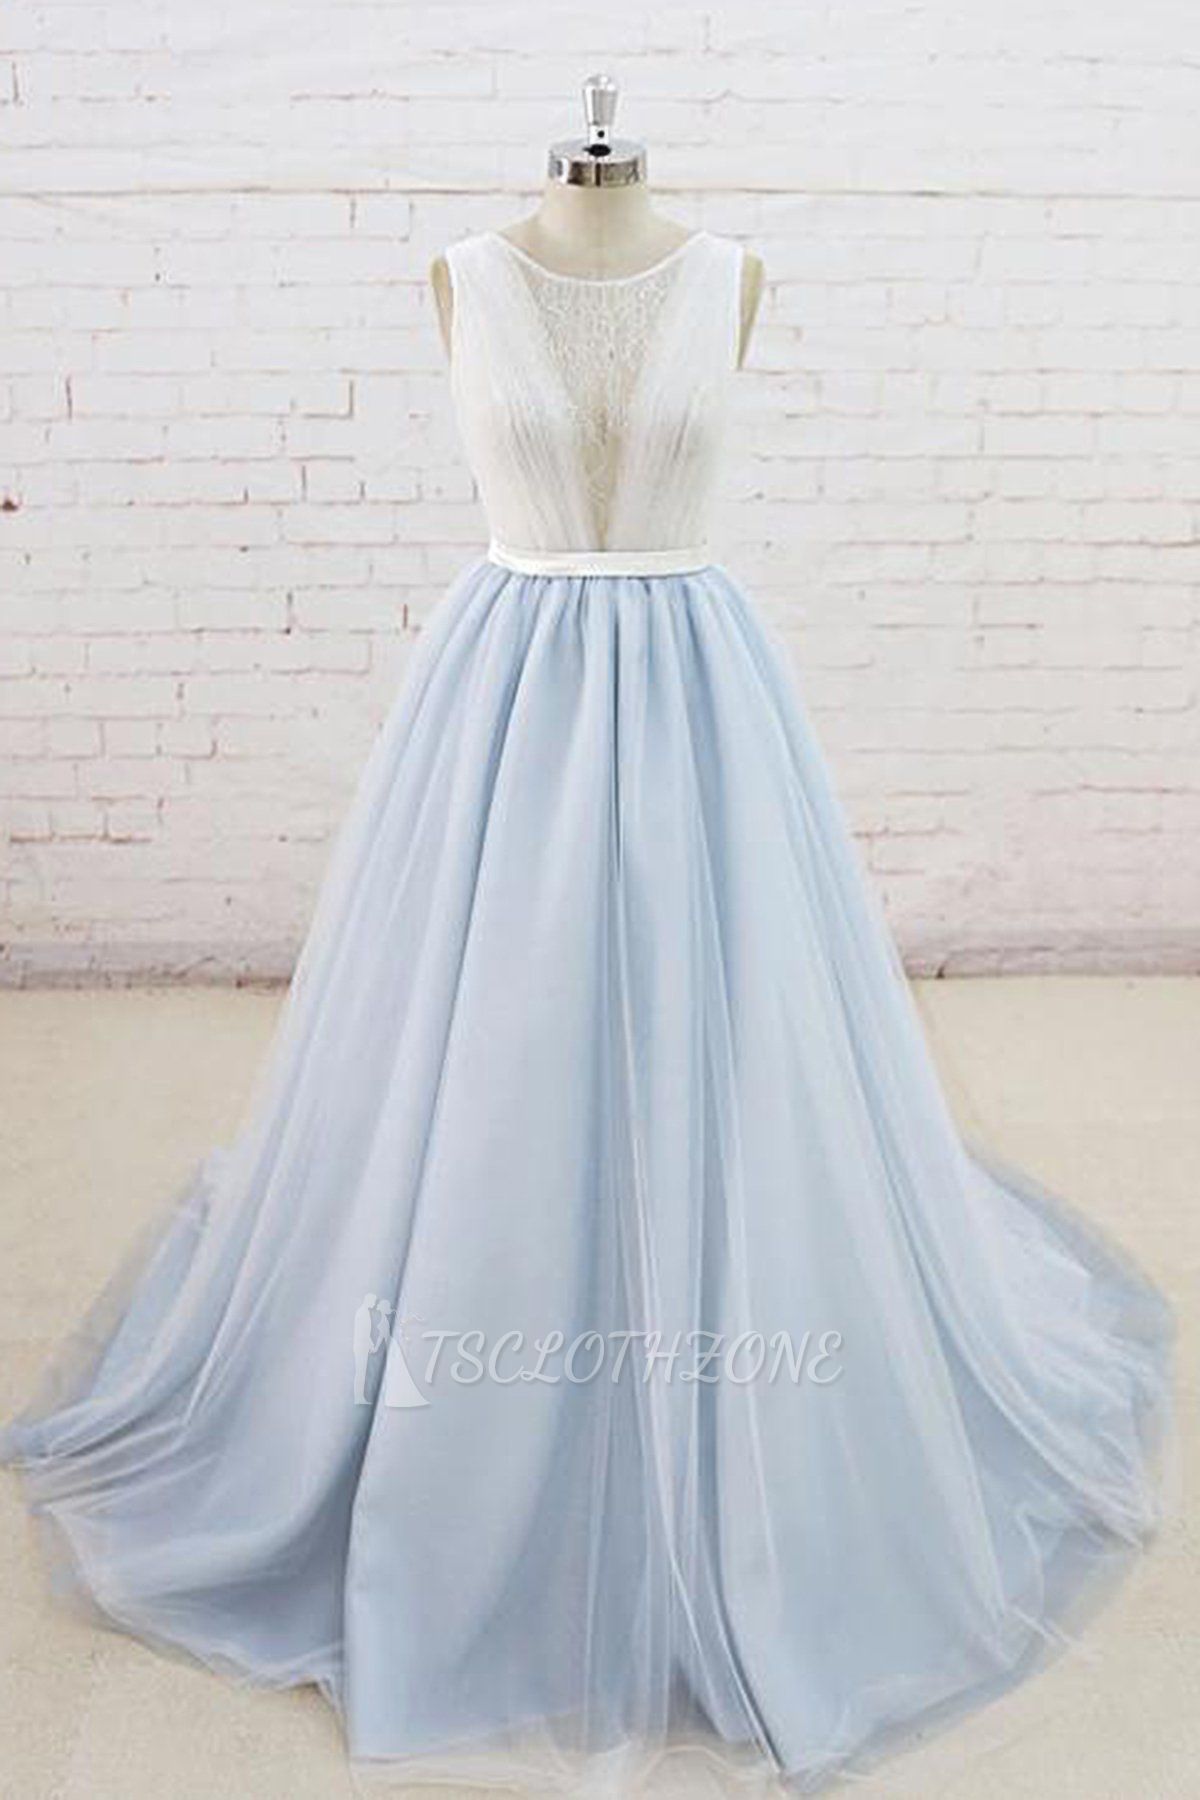 TsClothzone Gorgeous Light Blue Tulle Lace Wedding Dress Sheer Back Summer Bridal Gowns On Sale